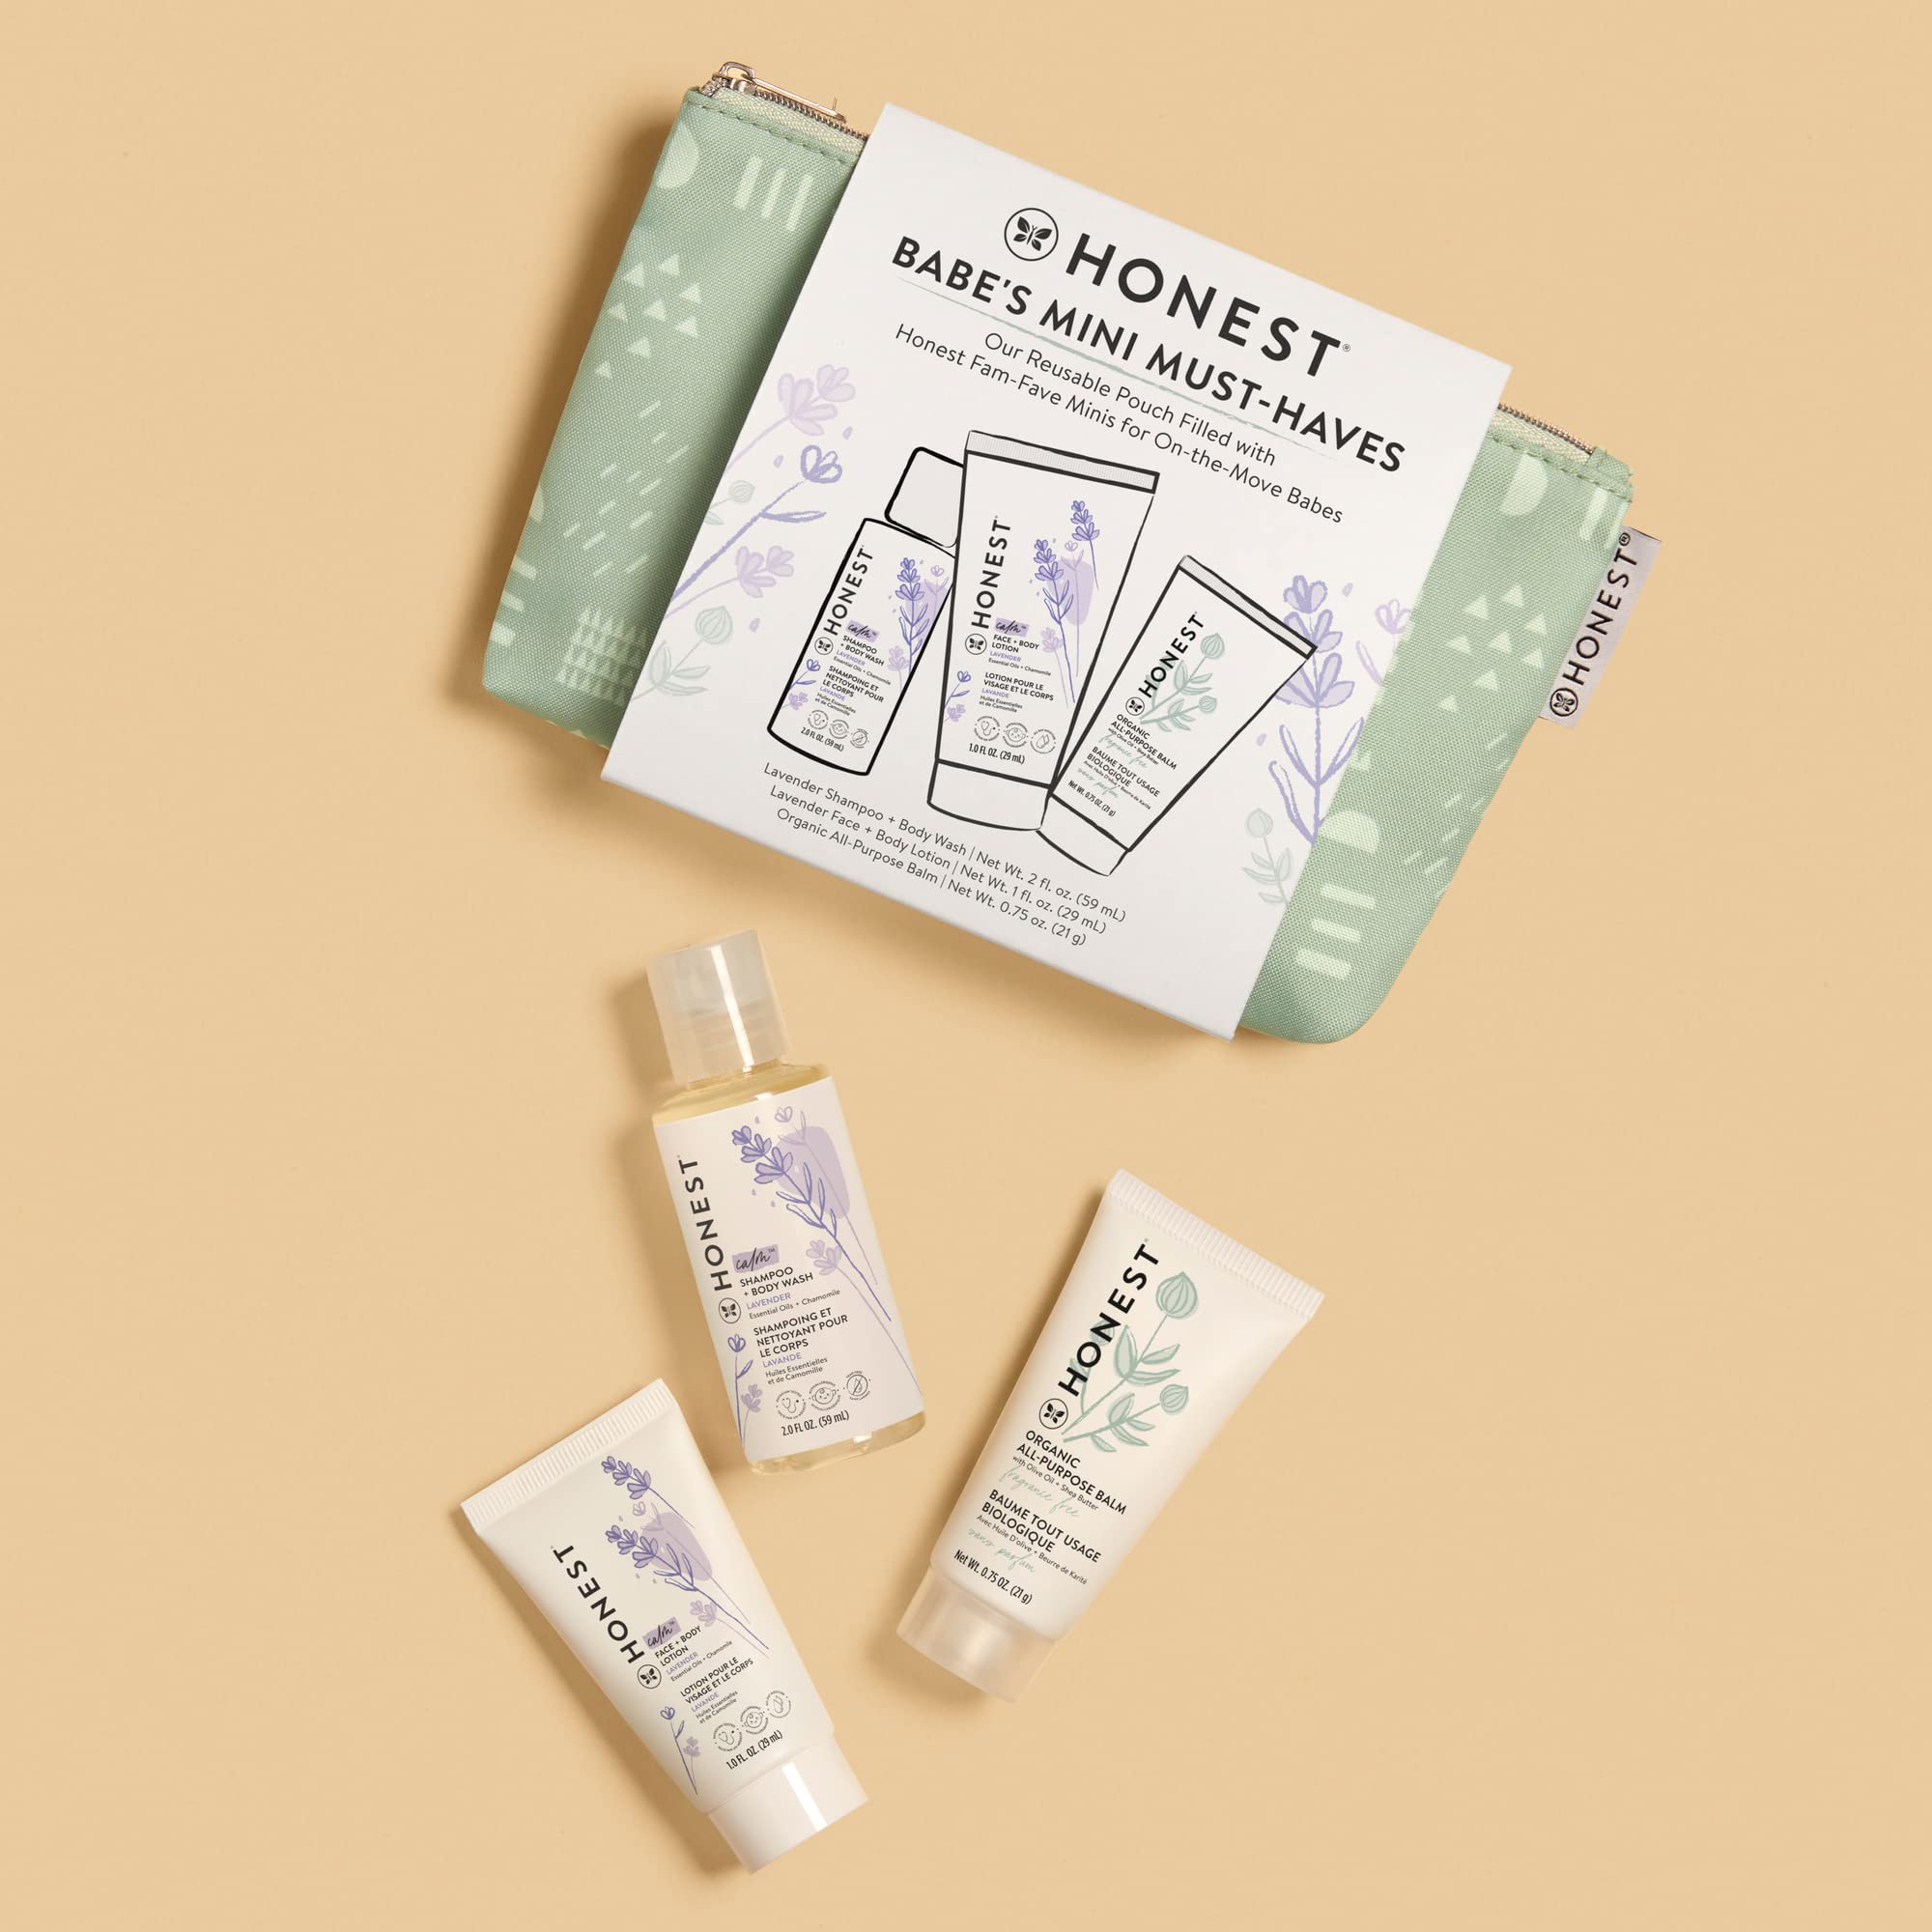 The Honest Company 2-in-1 Cleansing Shampoo + Body Wash | Gentle for Baby & Babe's Mini Must Haves Gift Set